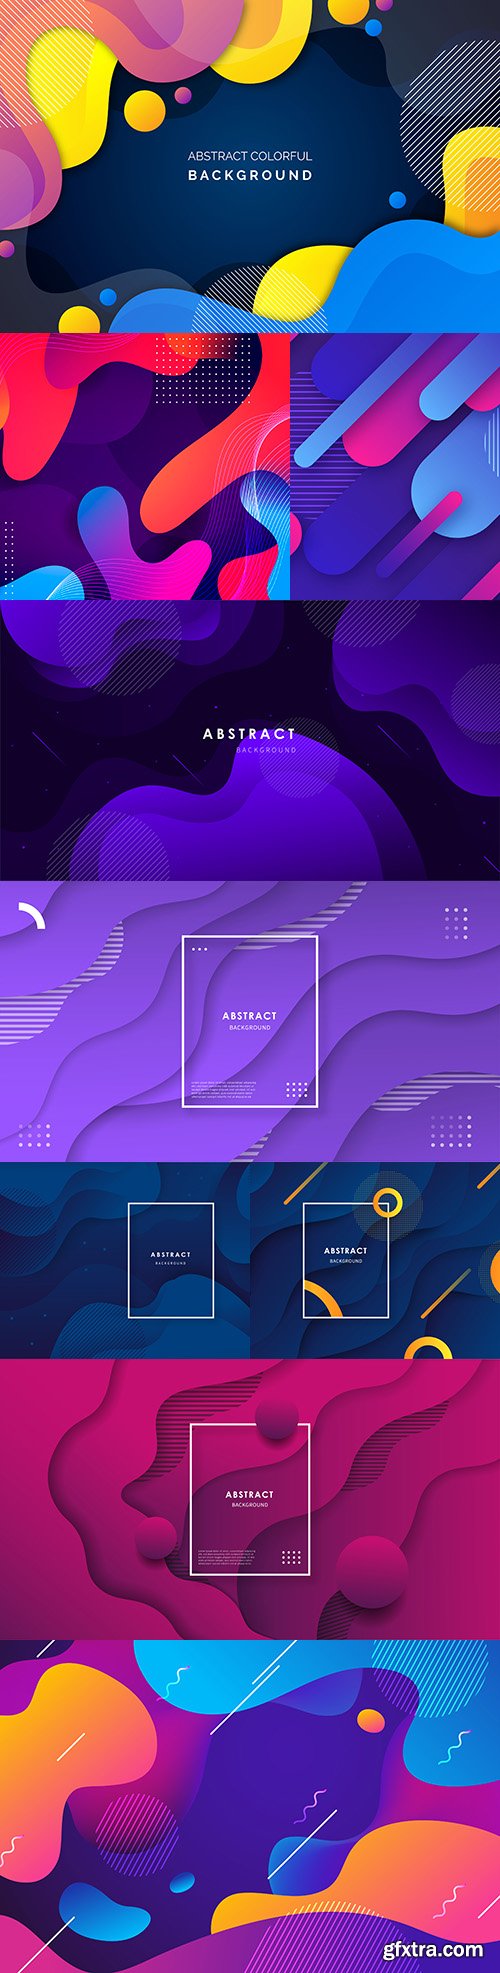 Abstract gradient wave background with colorful shapes
